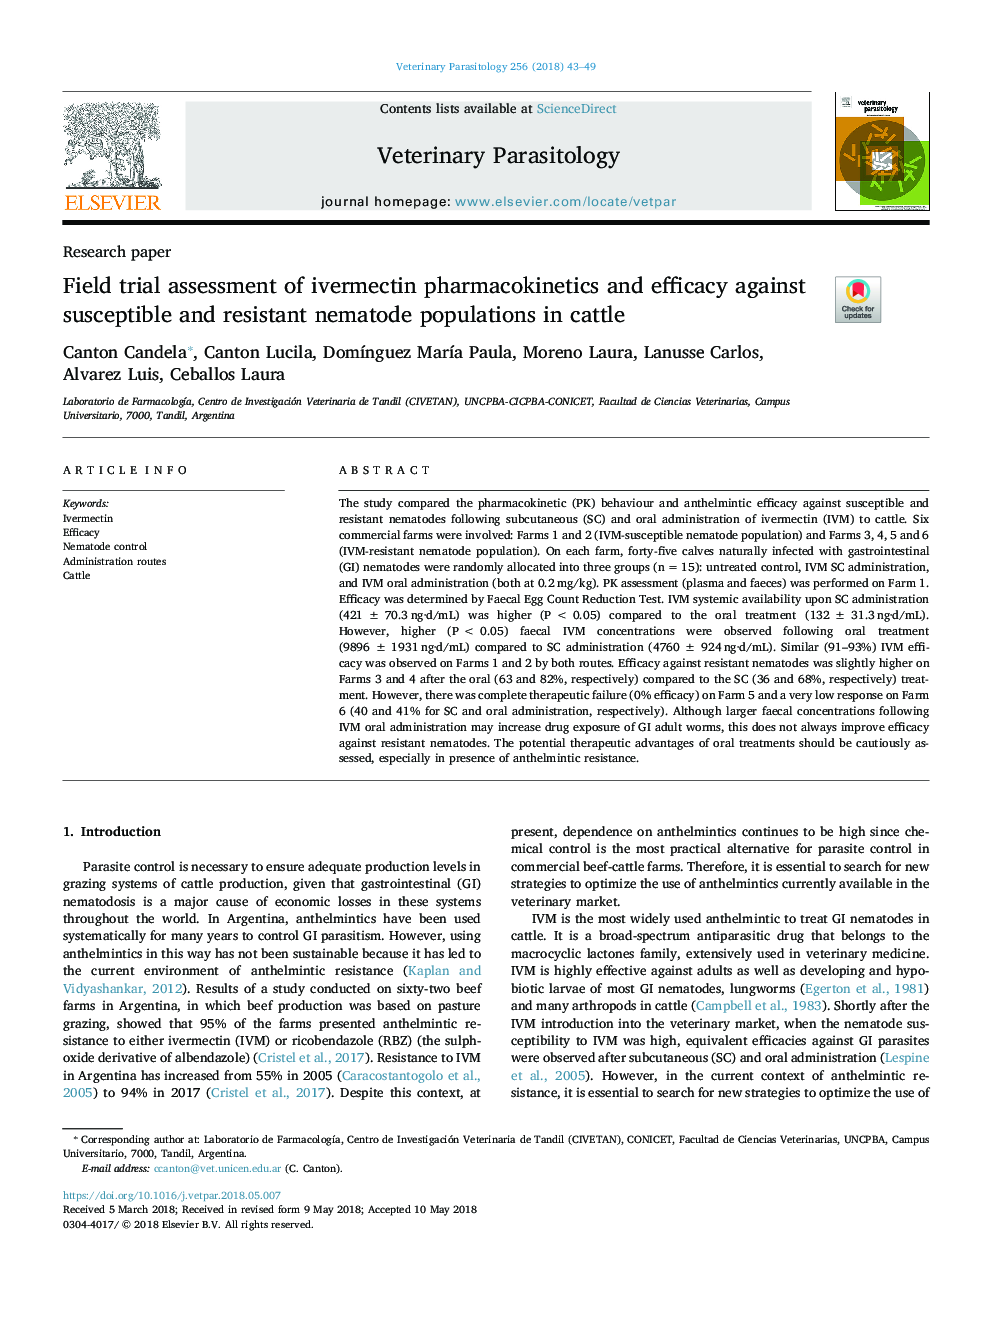 Field trial assessment of ivermectin pharmacokinetics and efficacy against susceptible and resistant nematode populations in cattle